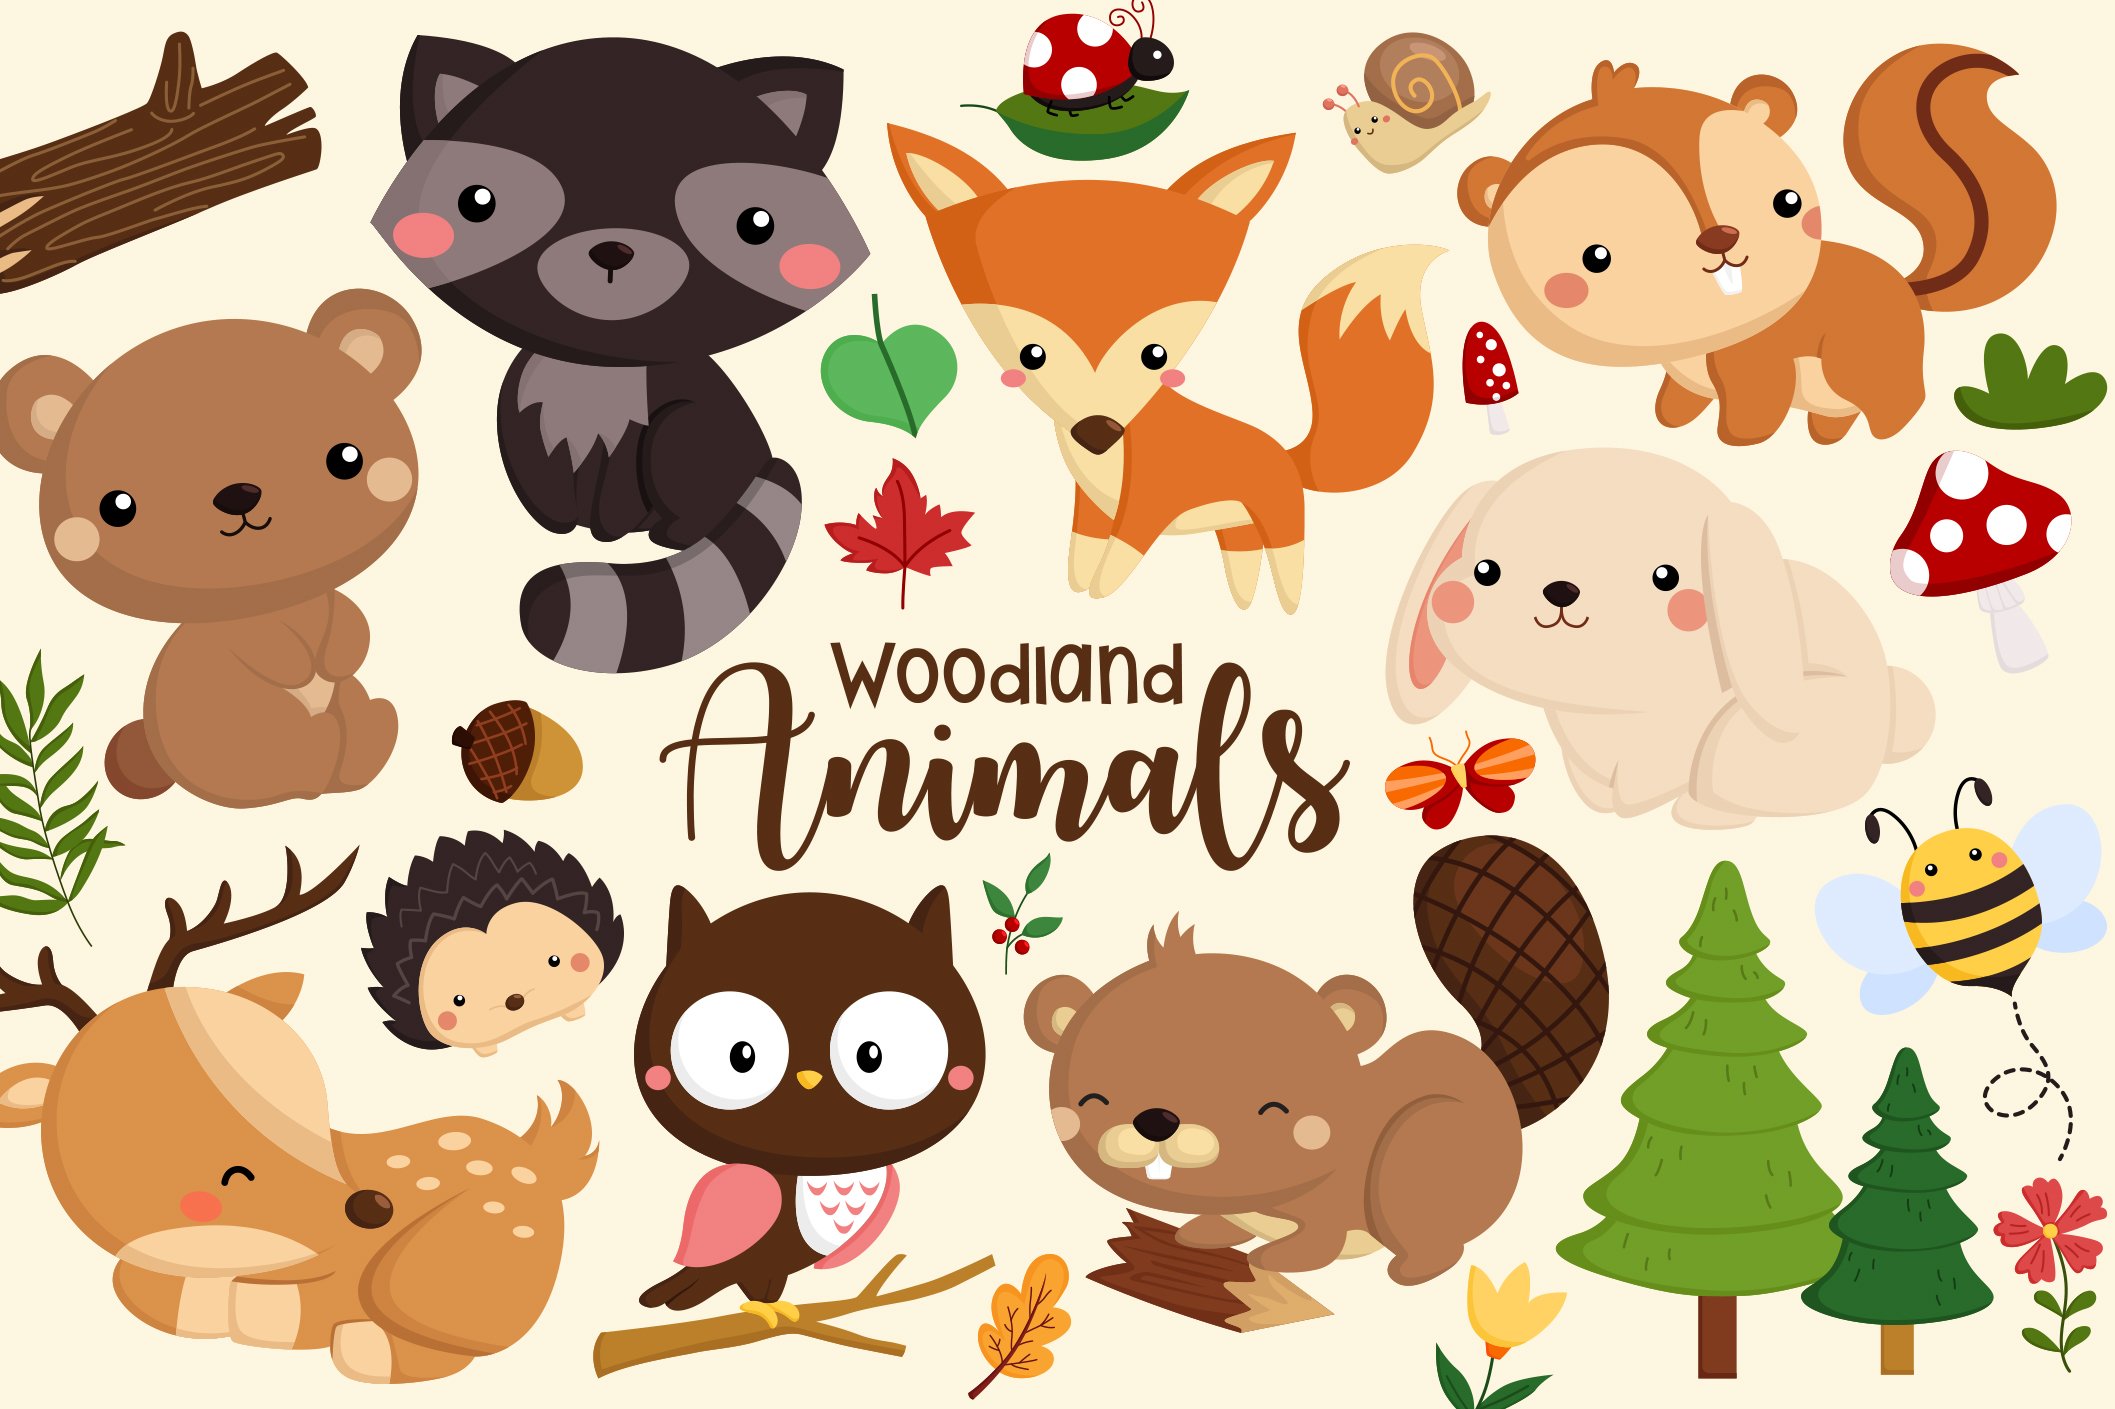 Woodland Animals Clipart cover image.